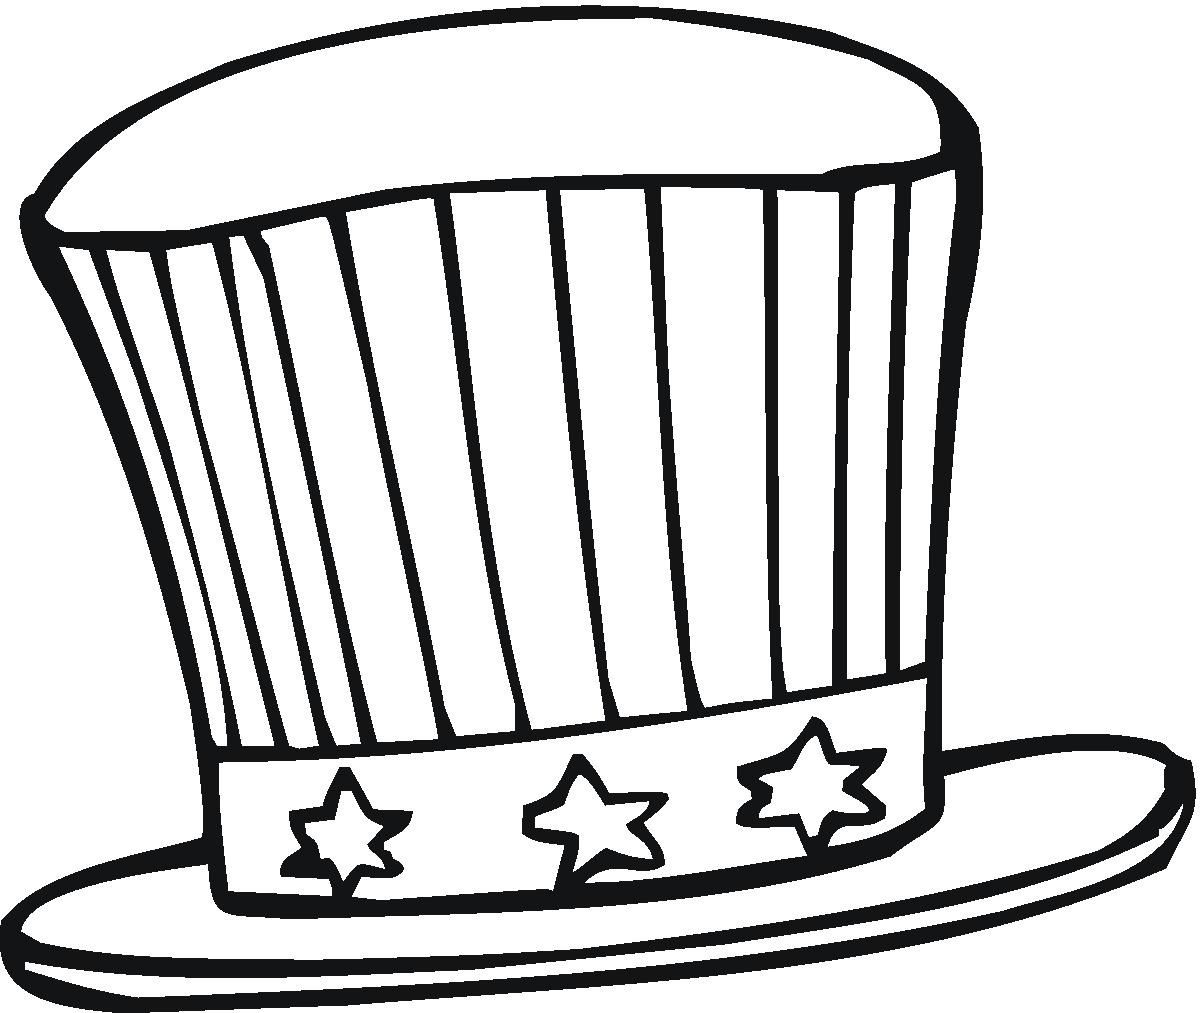 Chef's Hat Coloring Page - Coloring Pages For All Ages